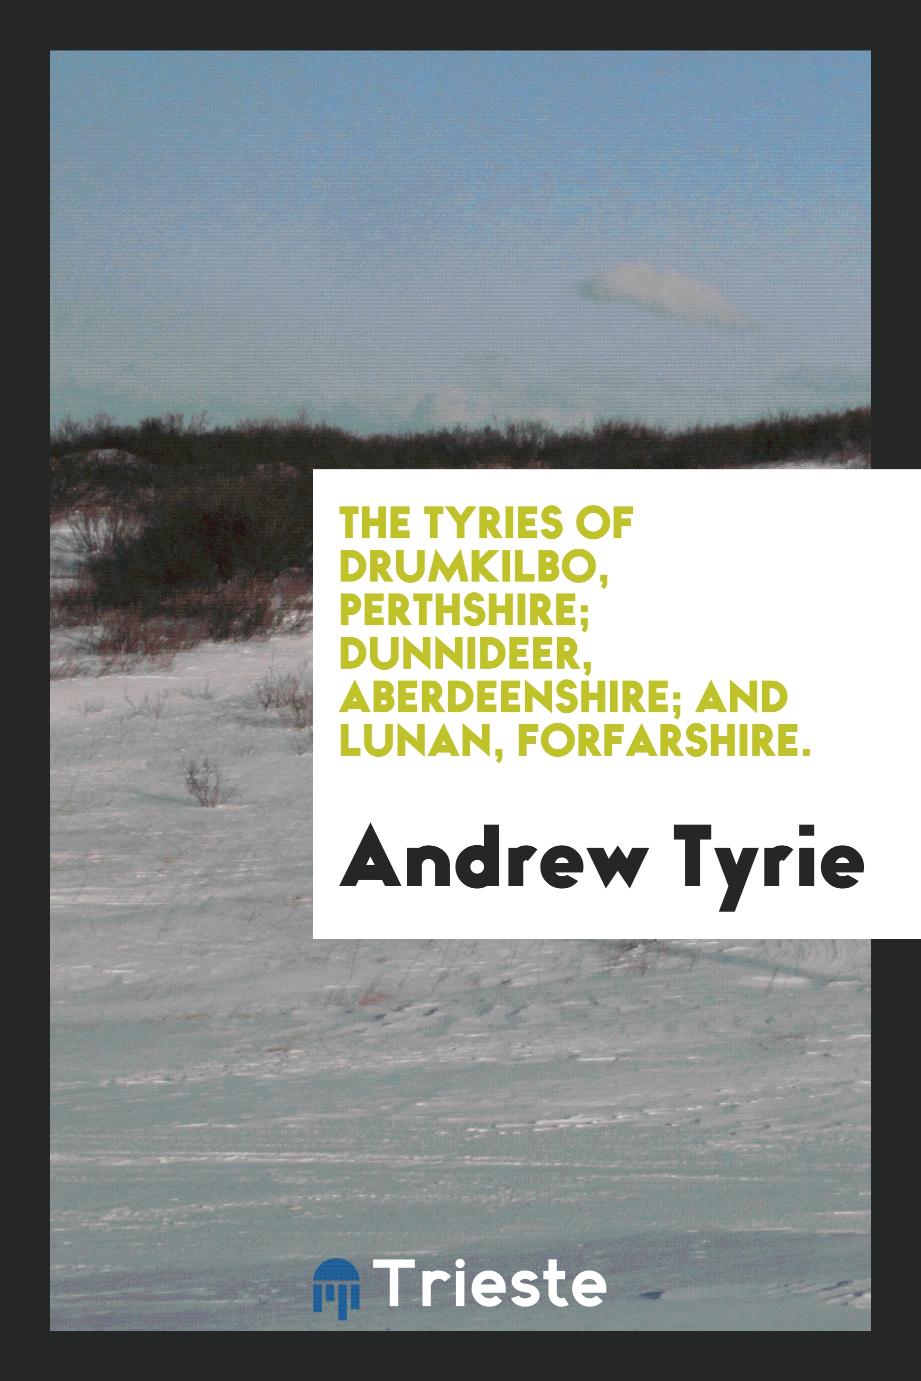 The Tyries of Drumkilbo, Perthshire; Dunnideer, Aberdeenshire; and Lunan, Forfarshire.